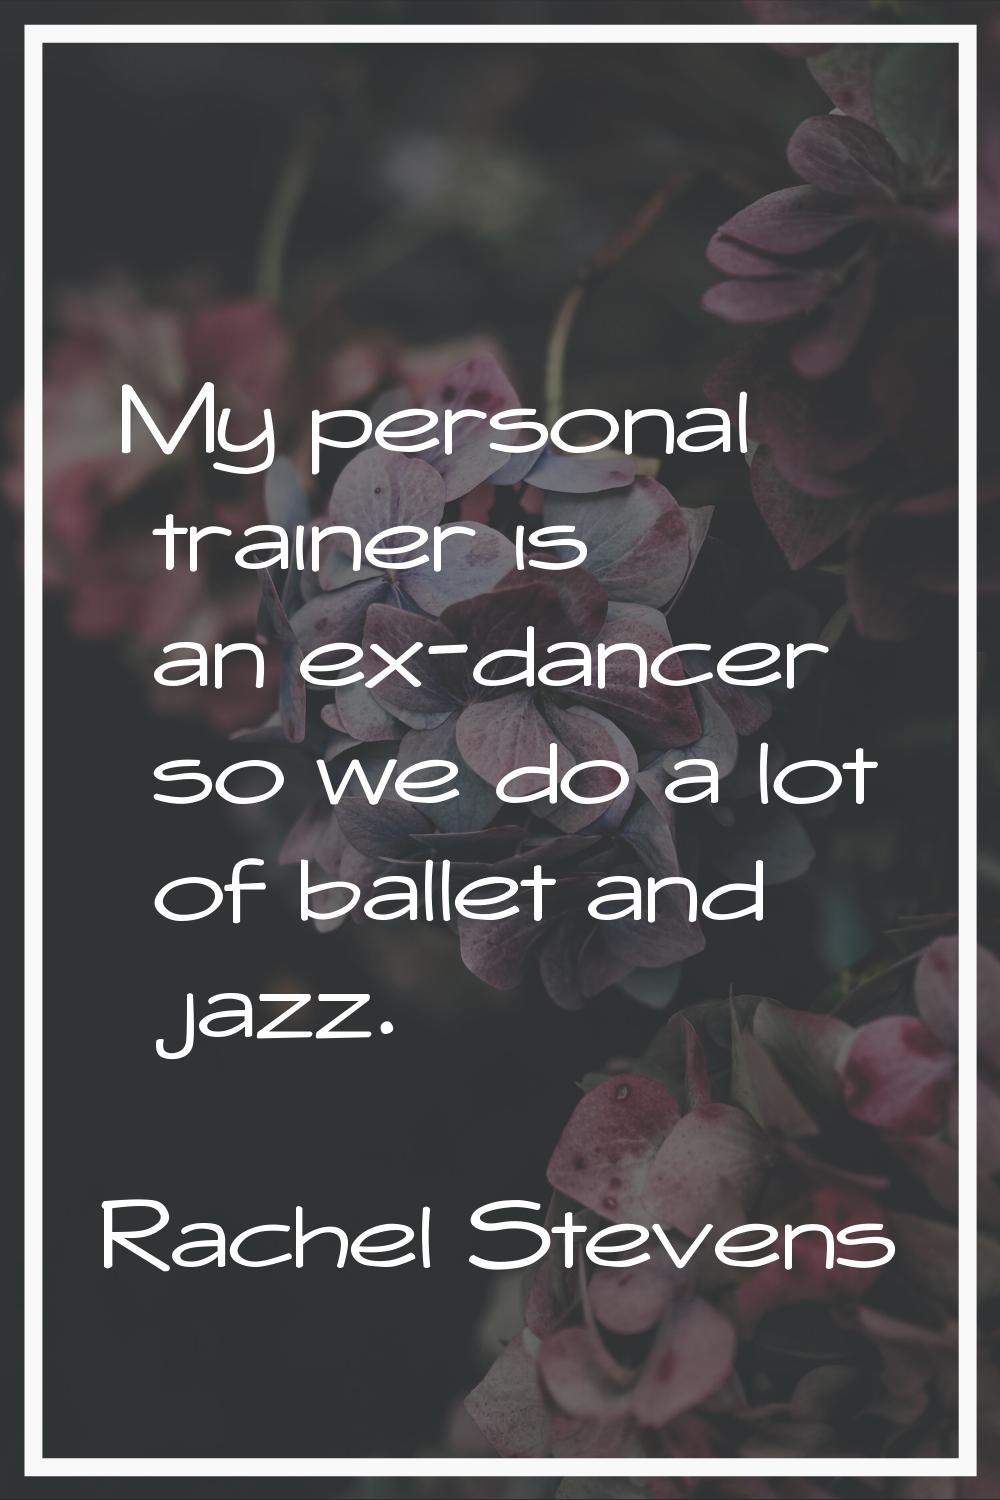 My personal trainer is an ex-dancer so we do a lot of ballet and jazz.